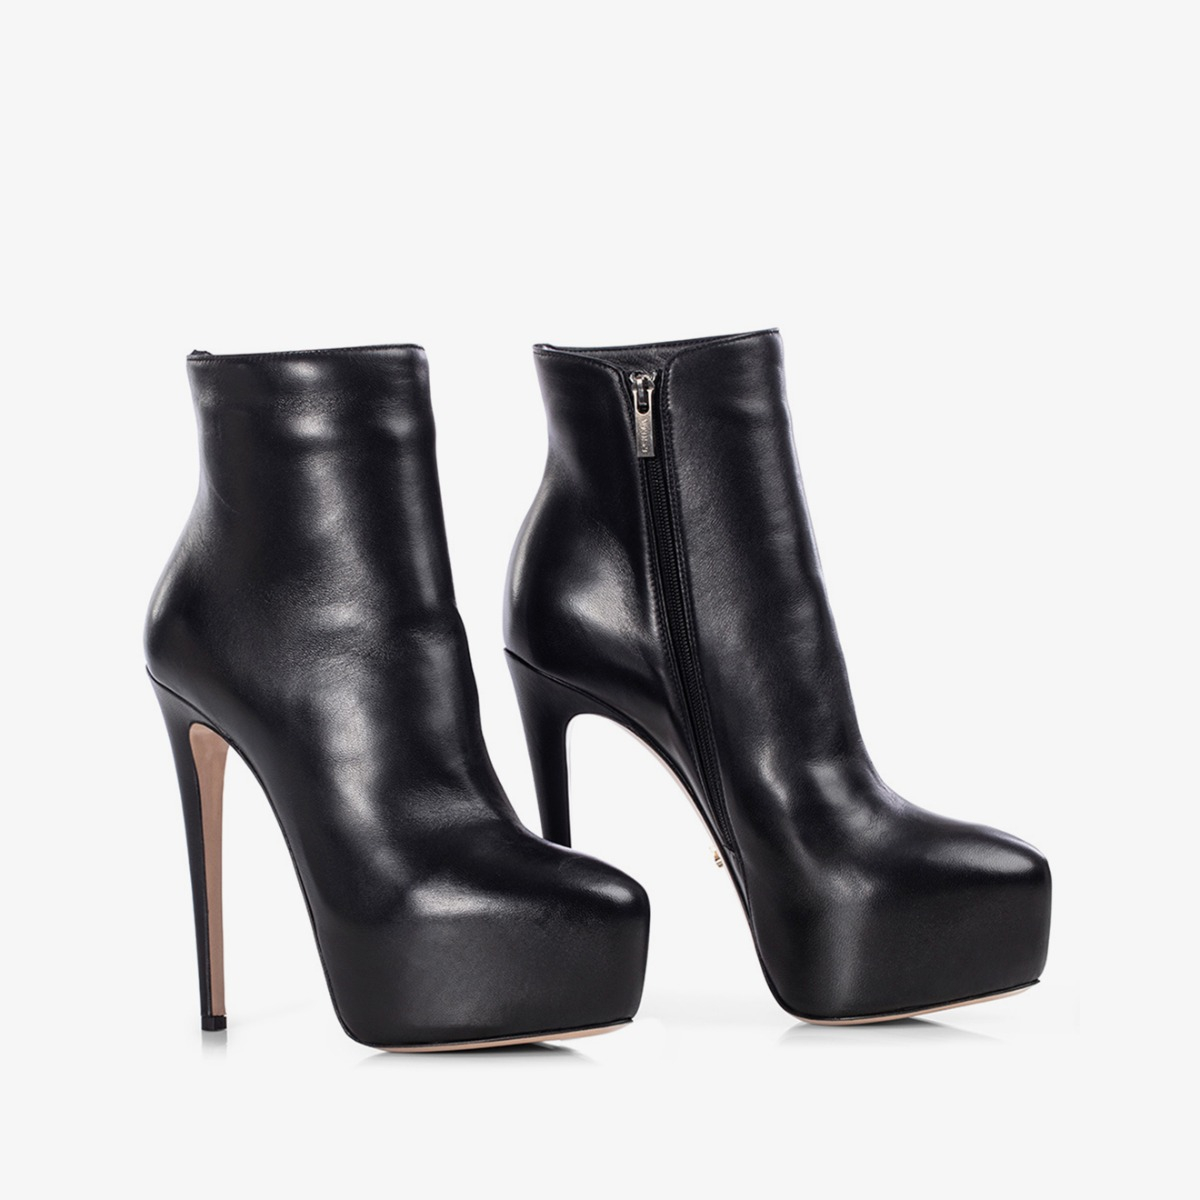 MIRANDA ANKLE BOOT 140 mm - Le Silla official outlet